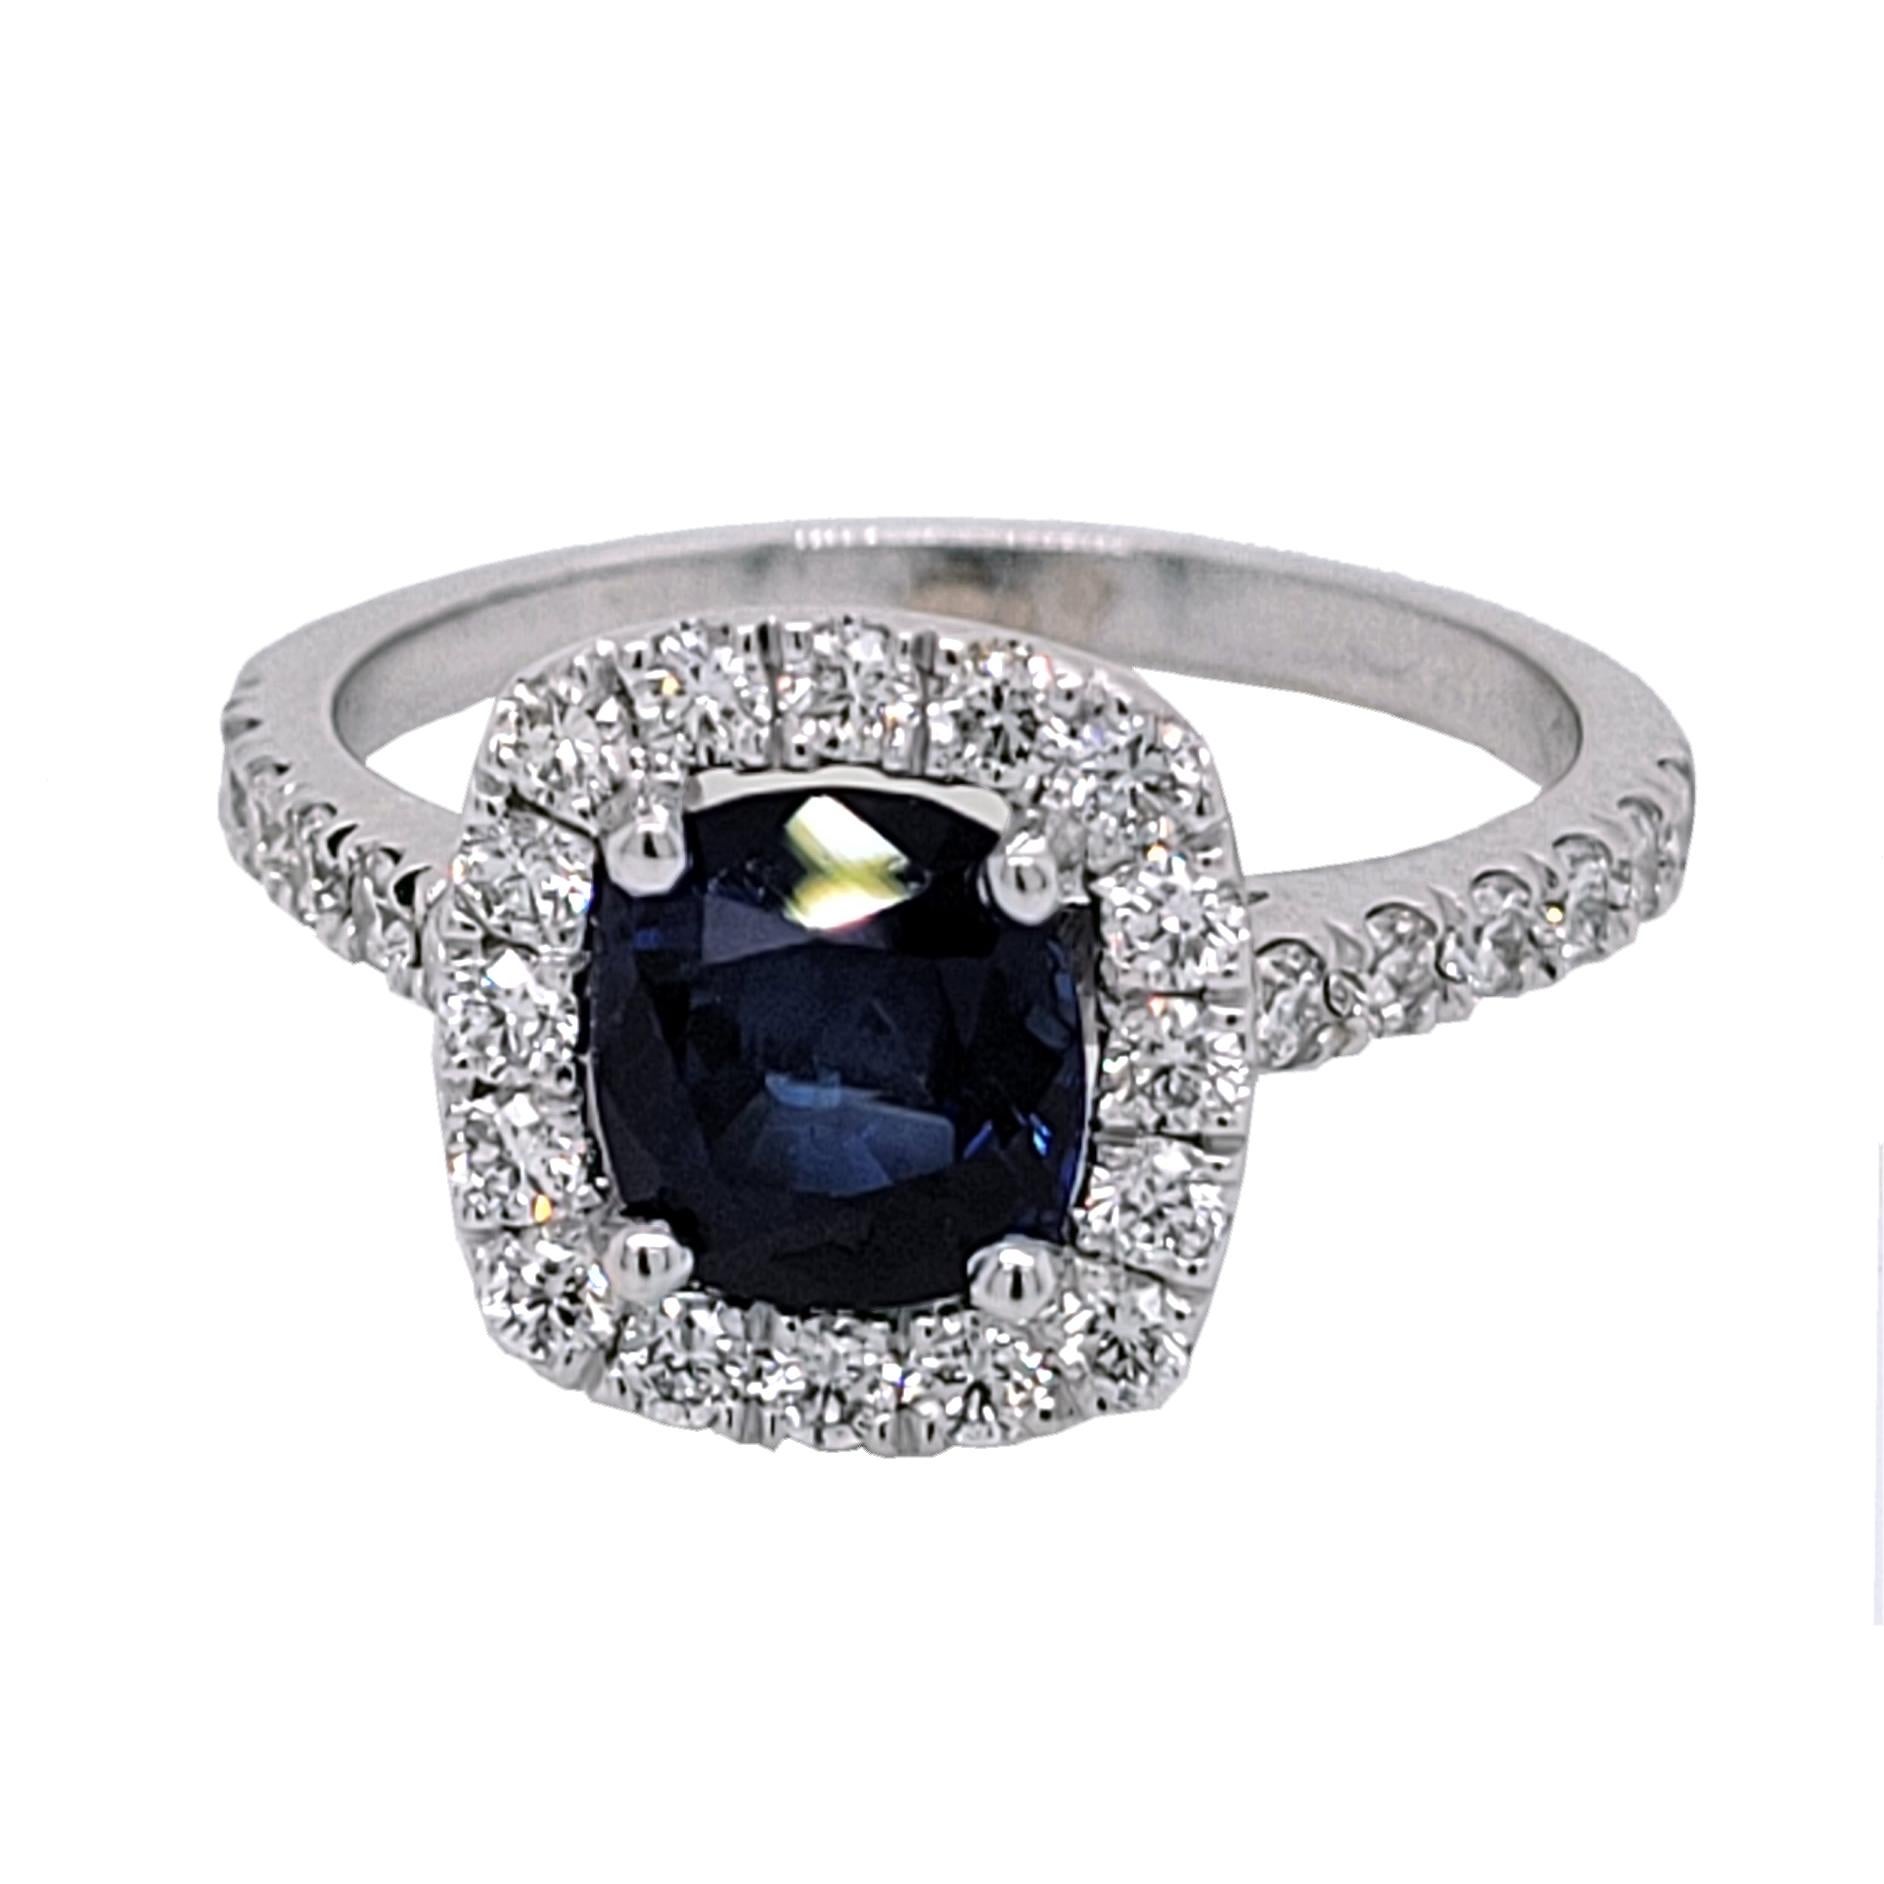 A  Beautiful Color 1.60 Ct Cushion Shaped Sapphire set in a gorgeous 18k gold  Pave set engagement Ring with halo. Total diamond weight of 0.59 Ct. diamonds on the side. 

Center stone: 1.60 Ct Cushion Shape Sapphire
Side stones: 0.59 total carat